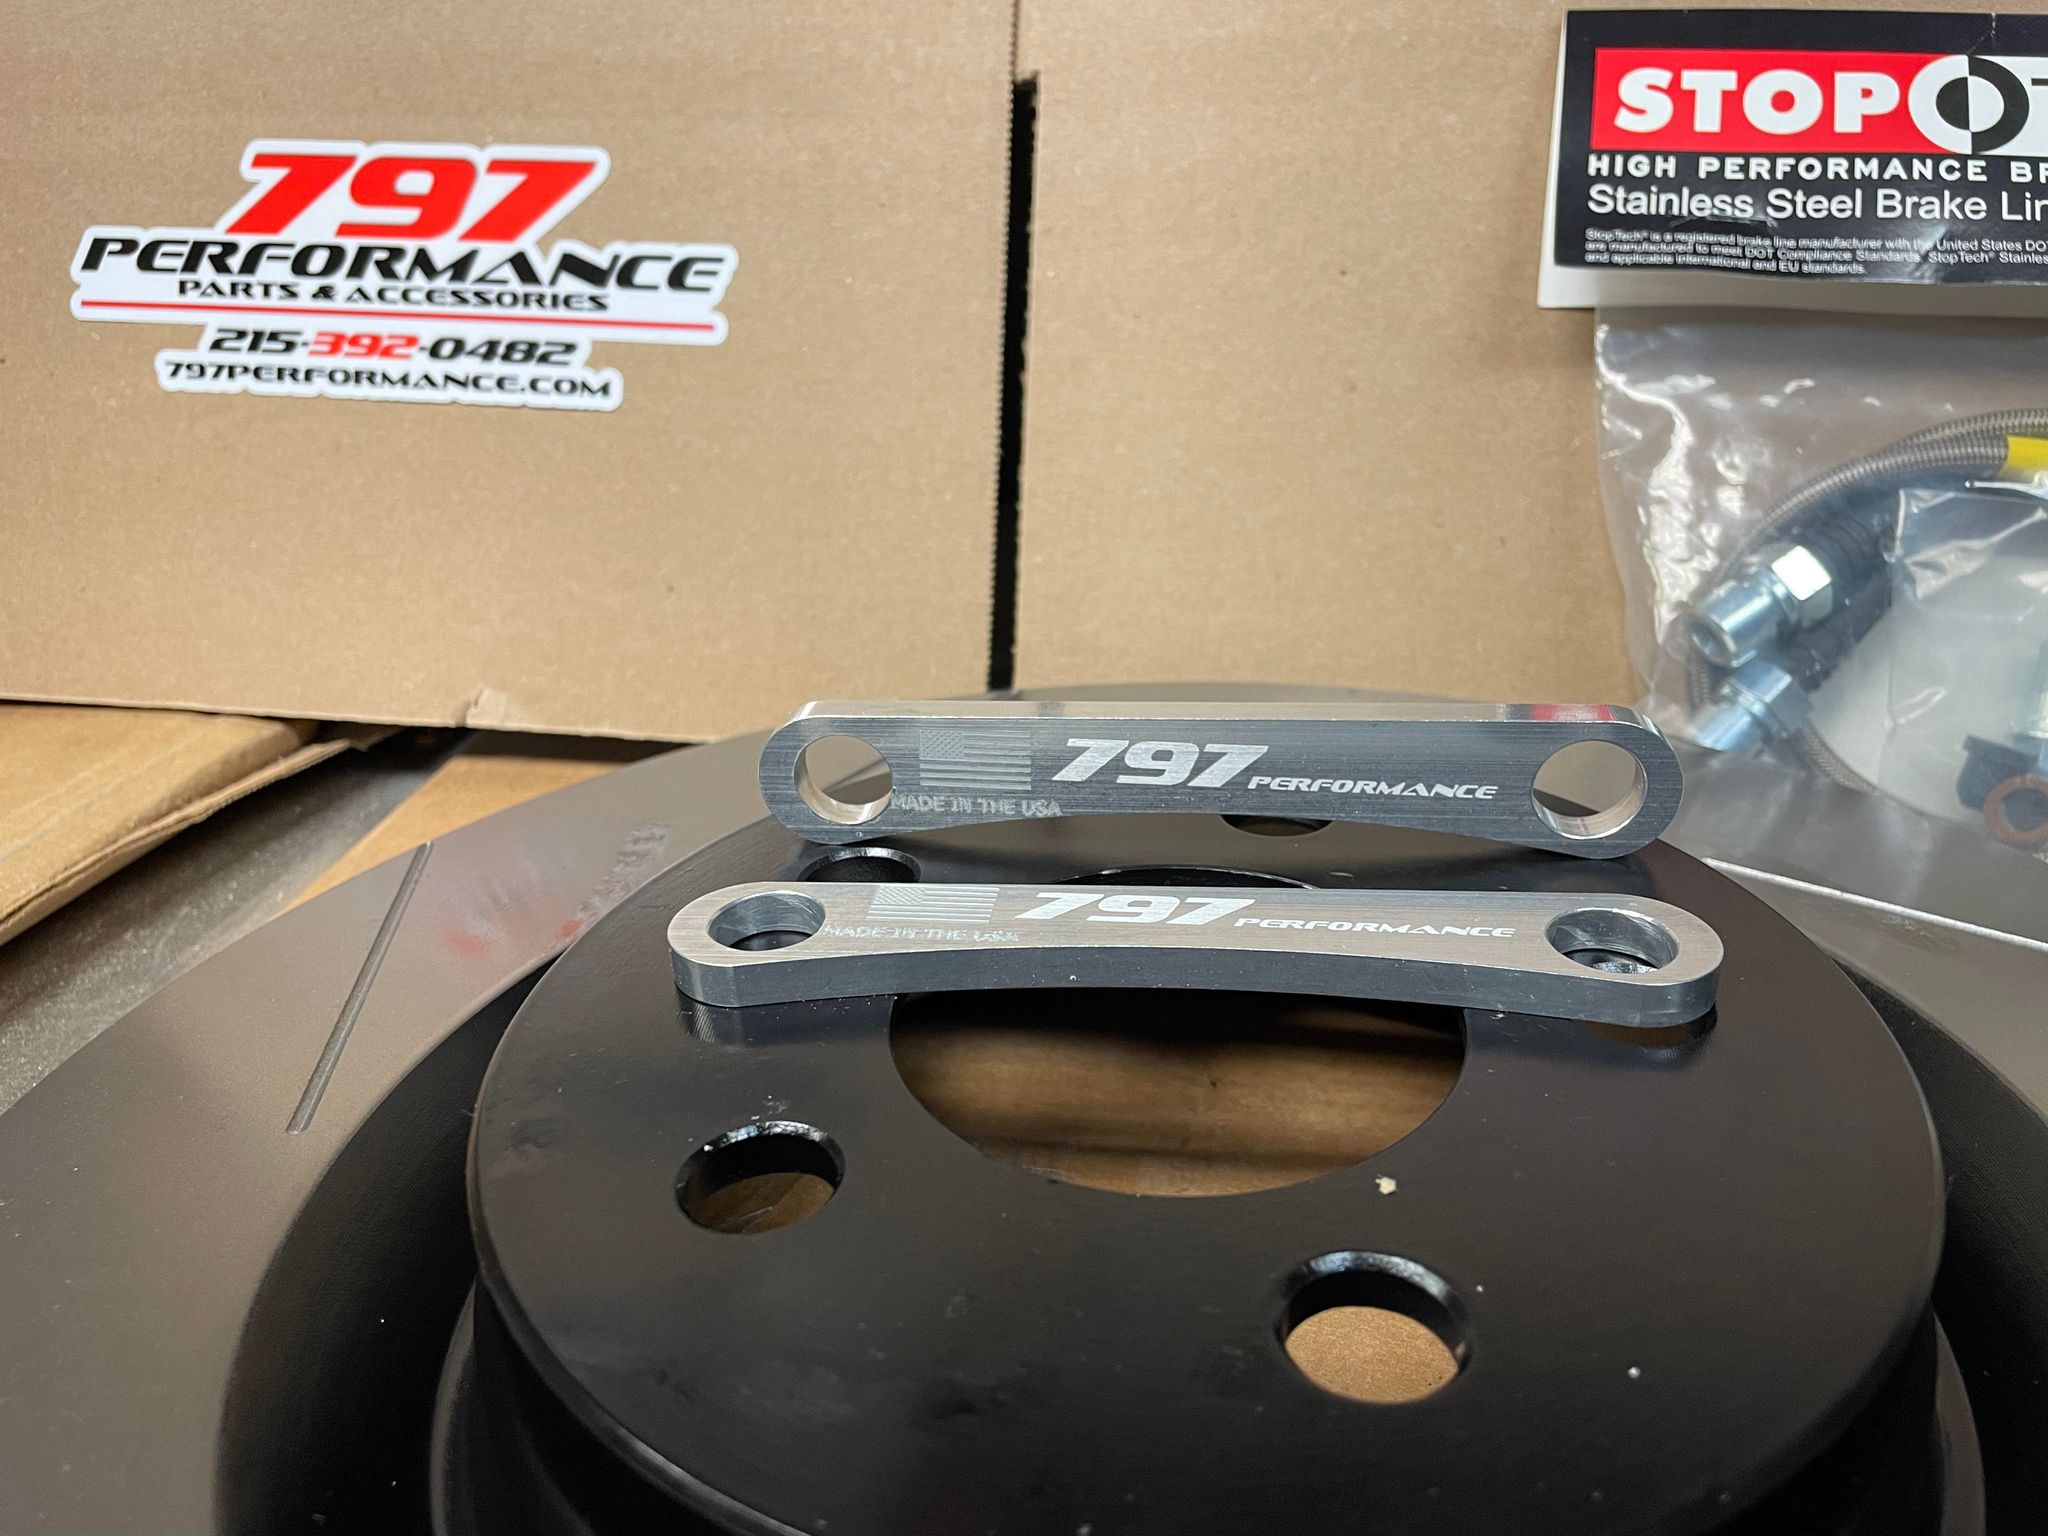 797 Performance - Bolt-on Charger/Challenger/300/Magnum Front RWD Brembo Conversion Kit